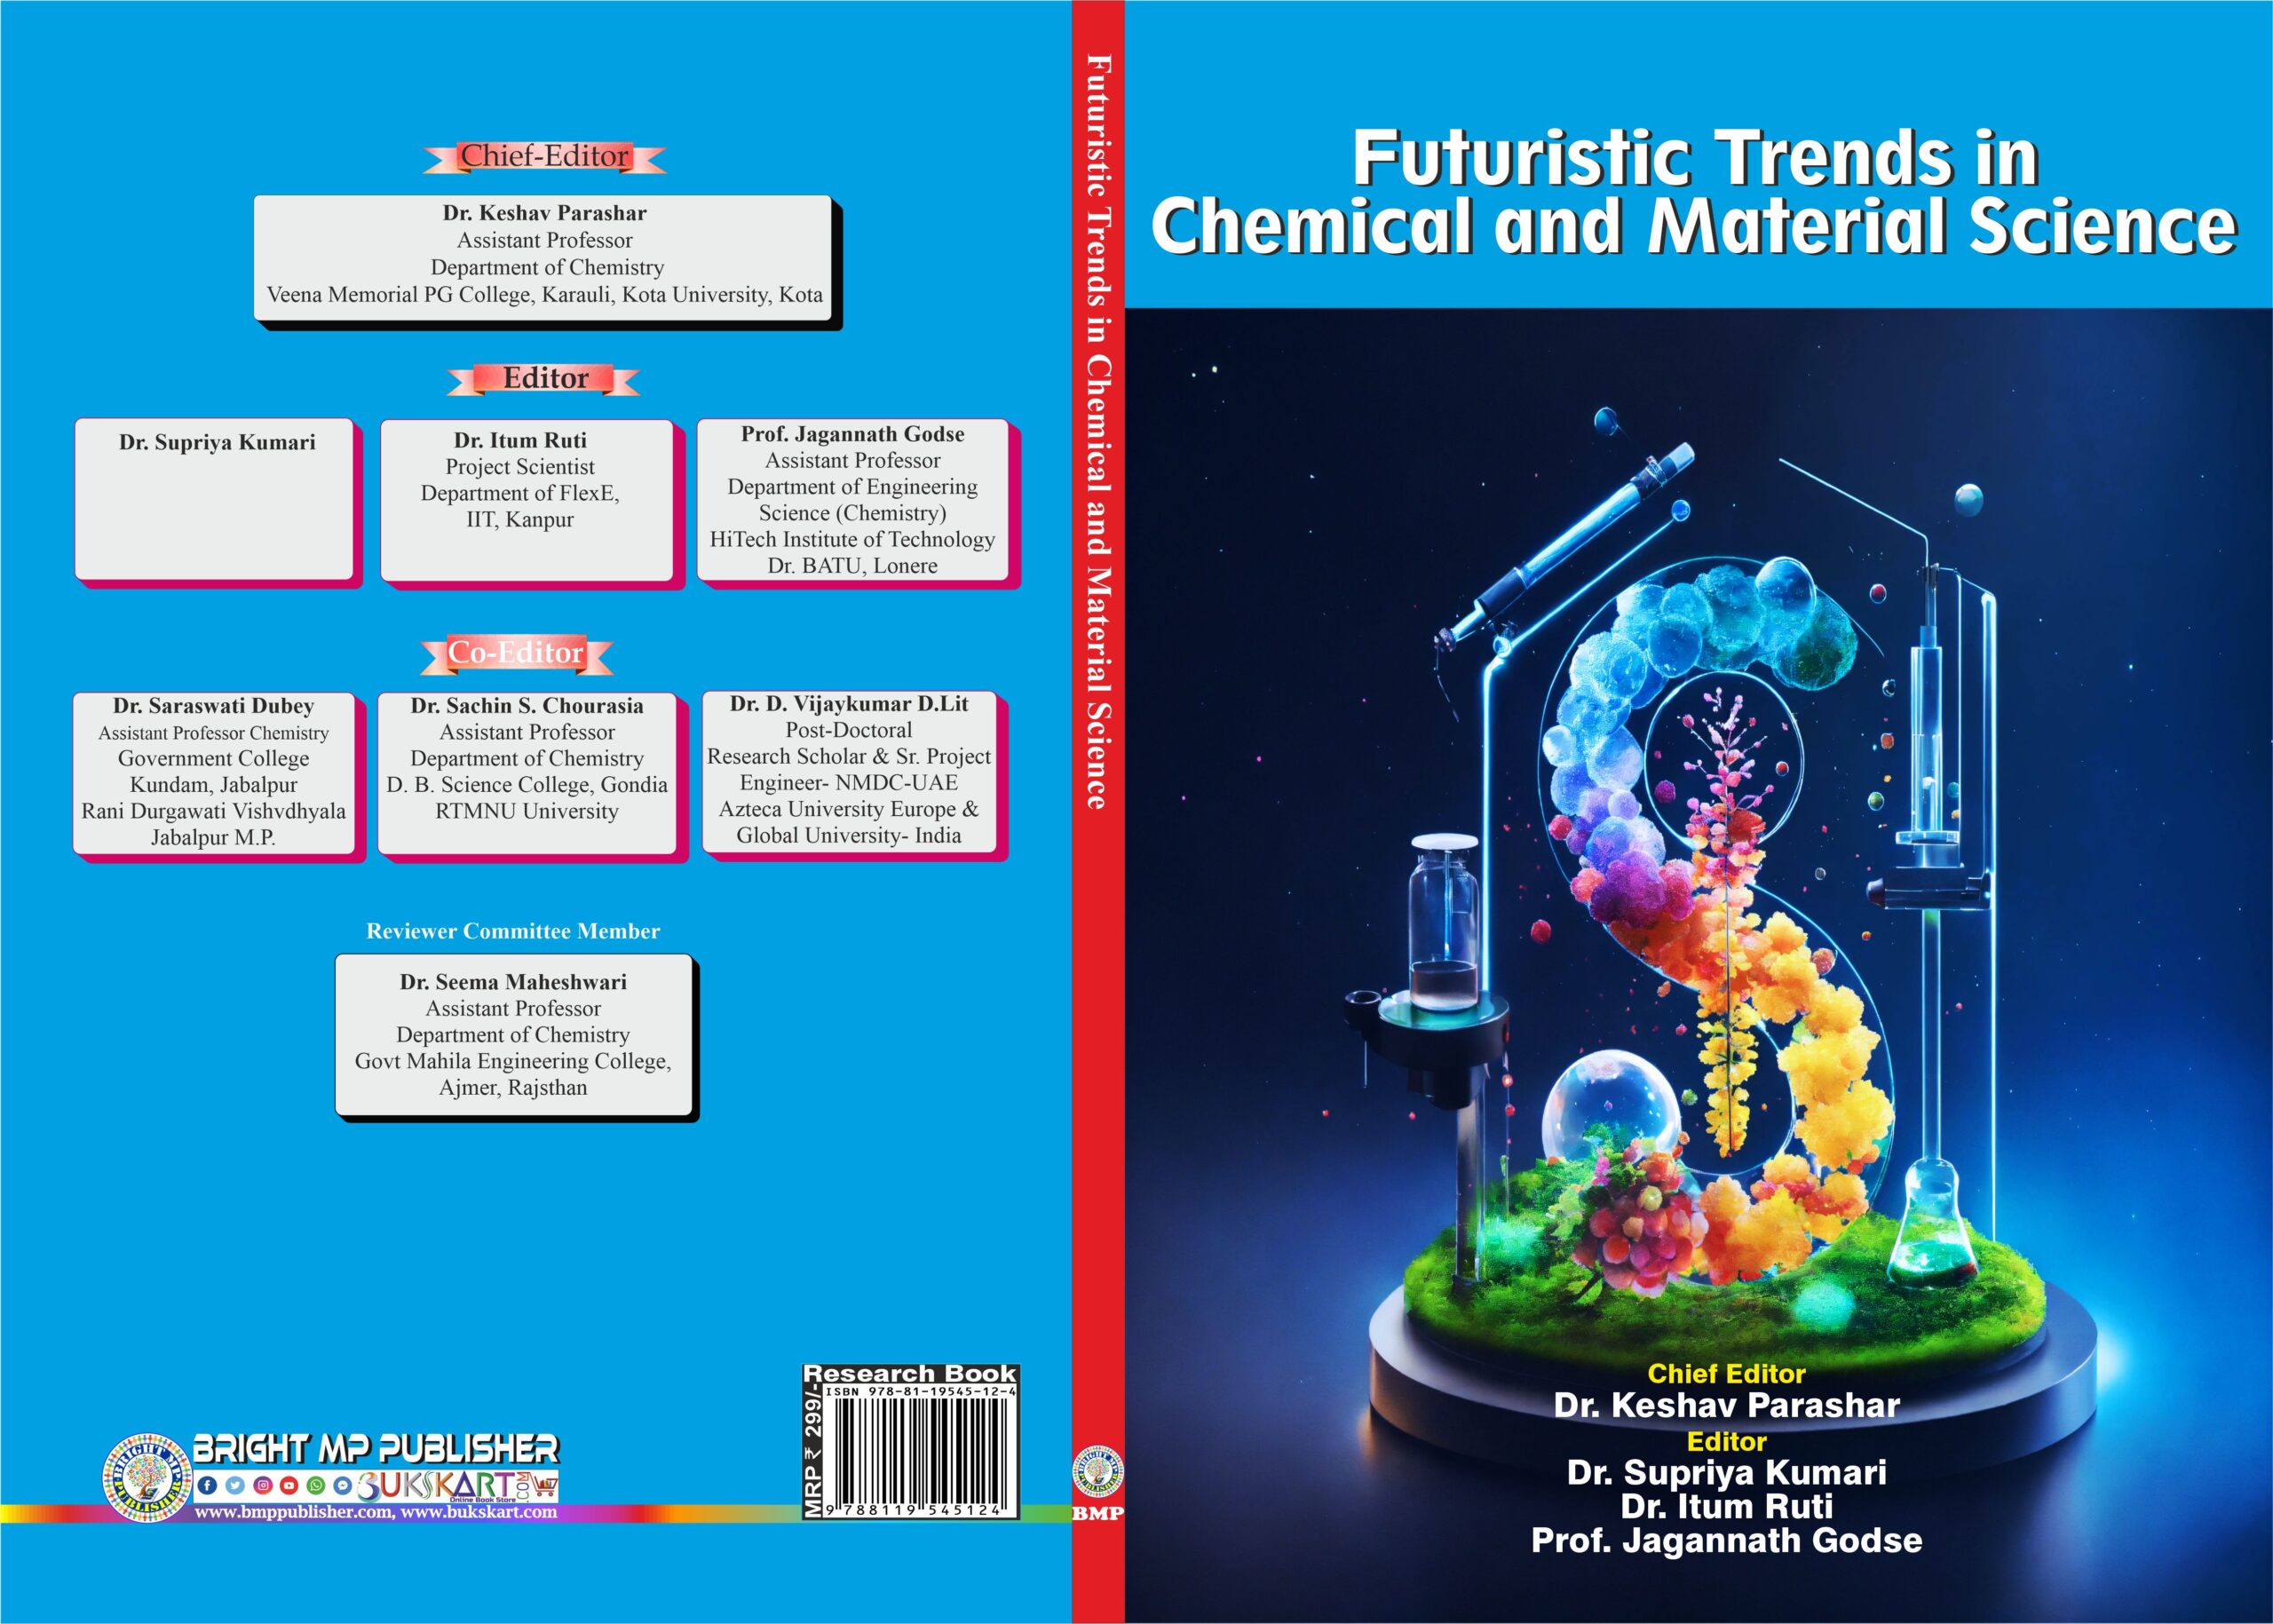 Cover Page of Futuristic Trends in Chemical and Material Science